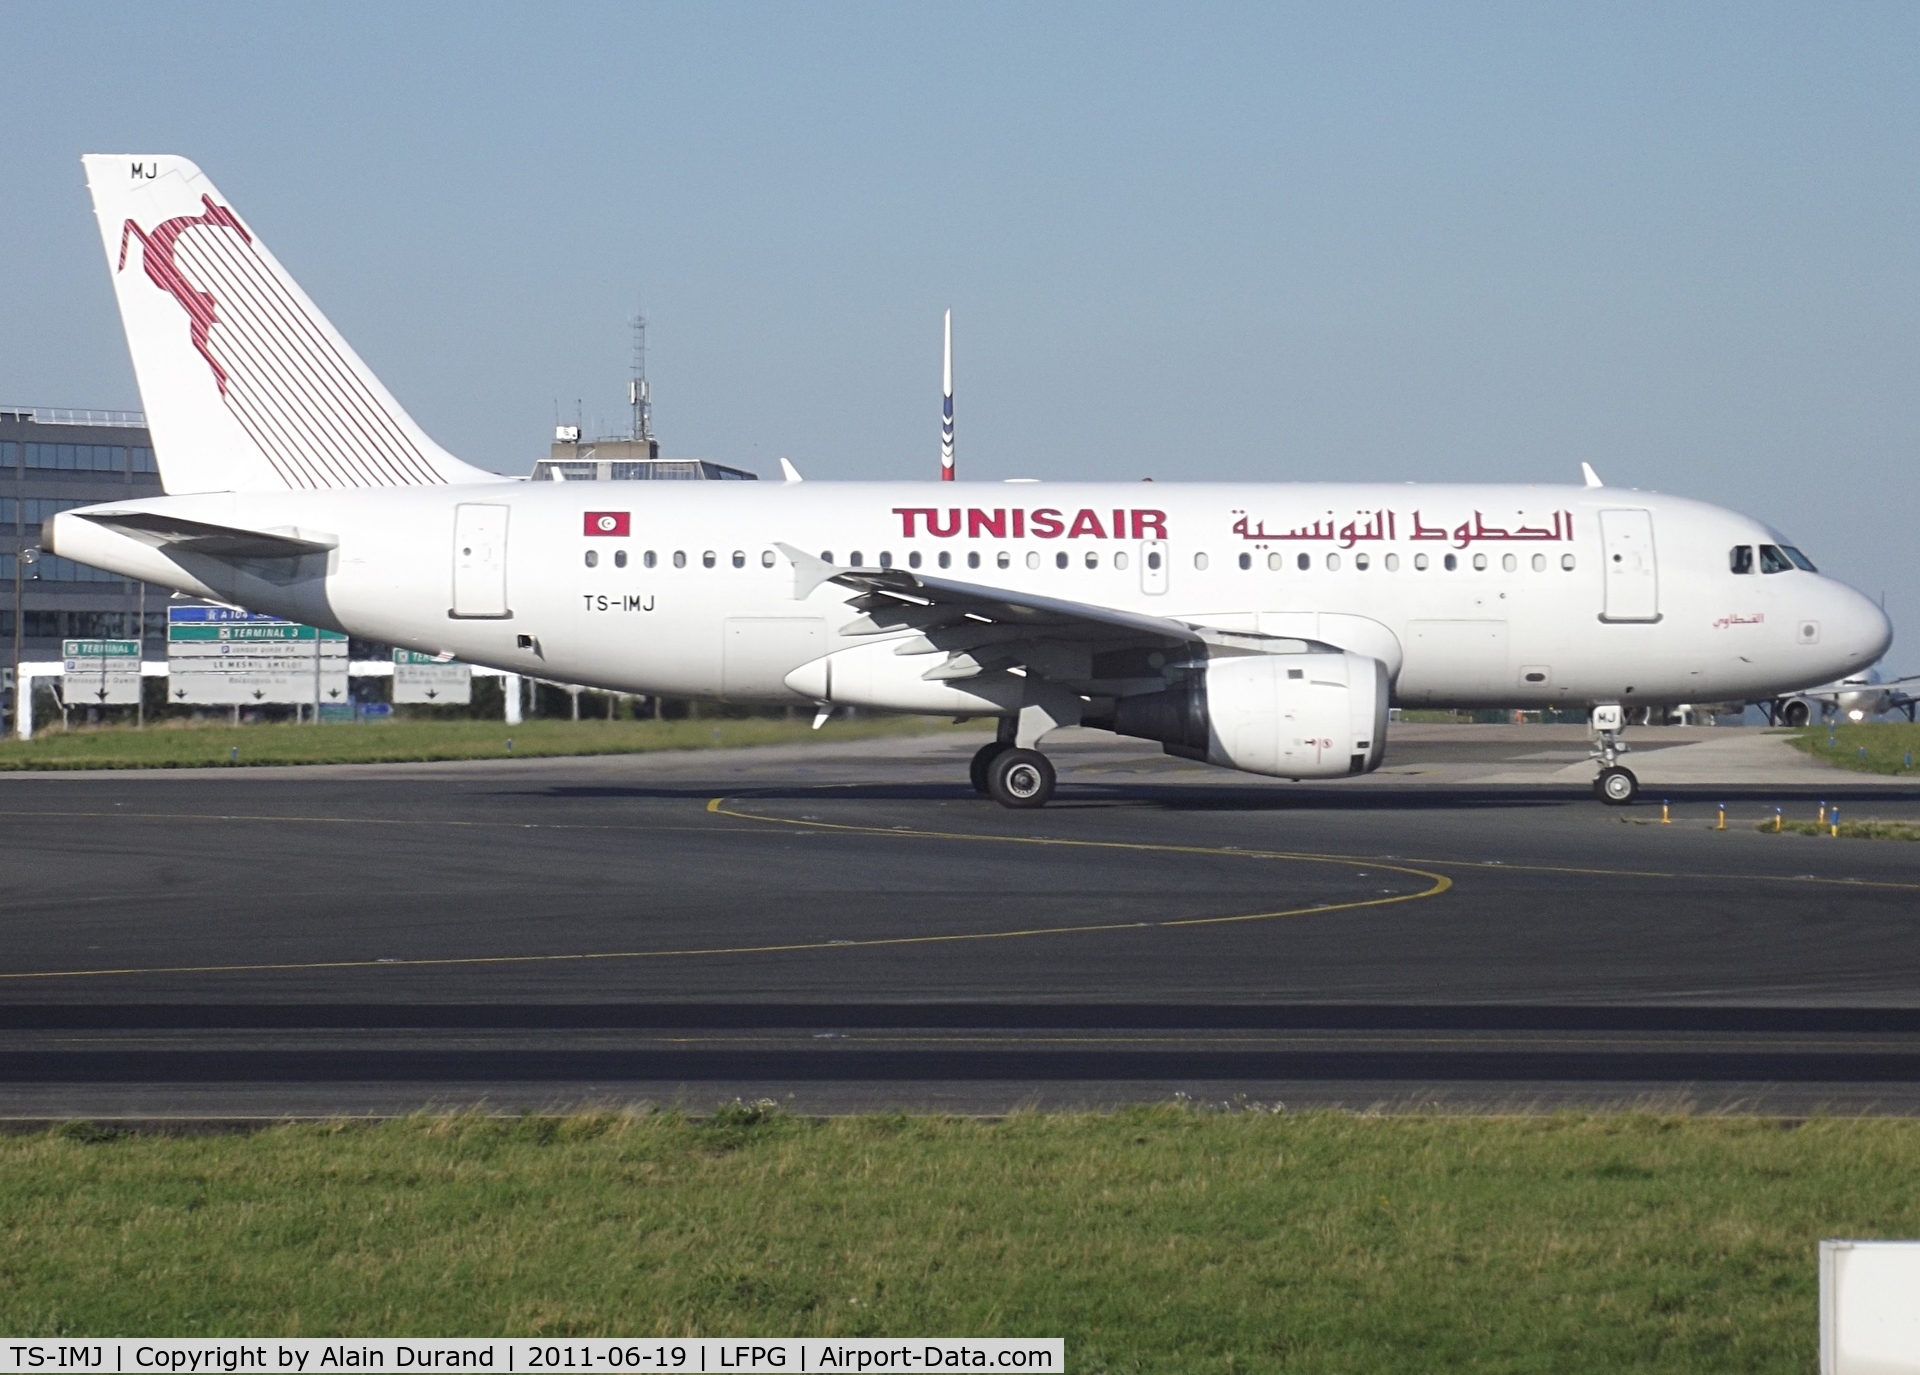 TS-IMJ, 1998 Airbus A319-114 C/N 869, Named after the resort city of El Kantaoui, Mike-Juliet is seen taxying to runway 08R from terminal 3.